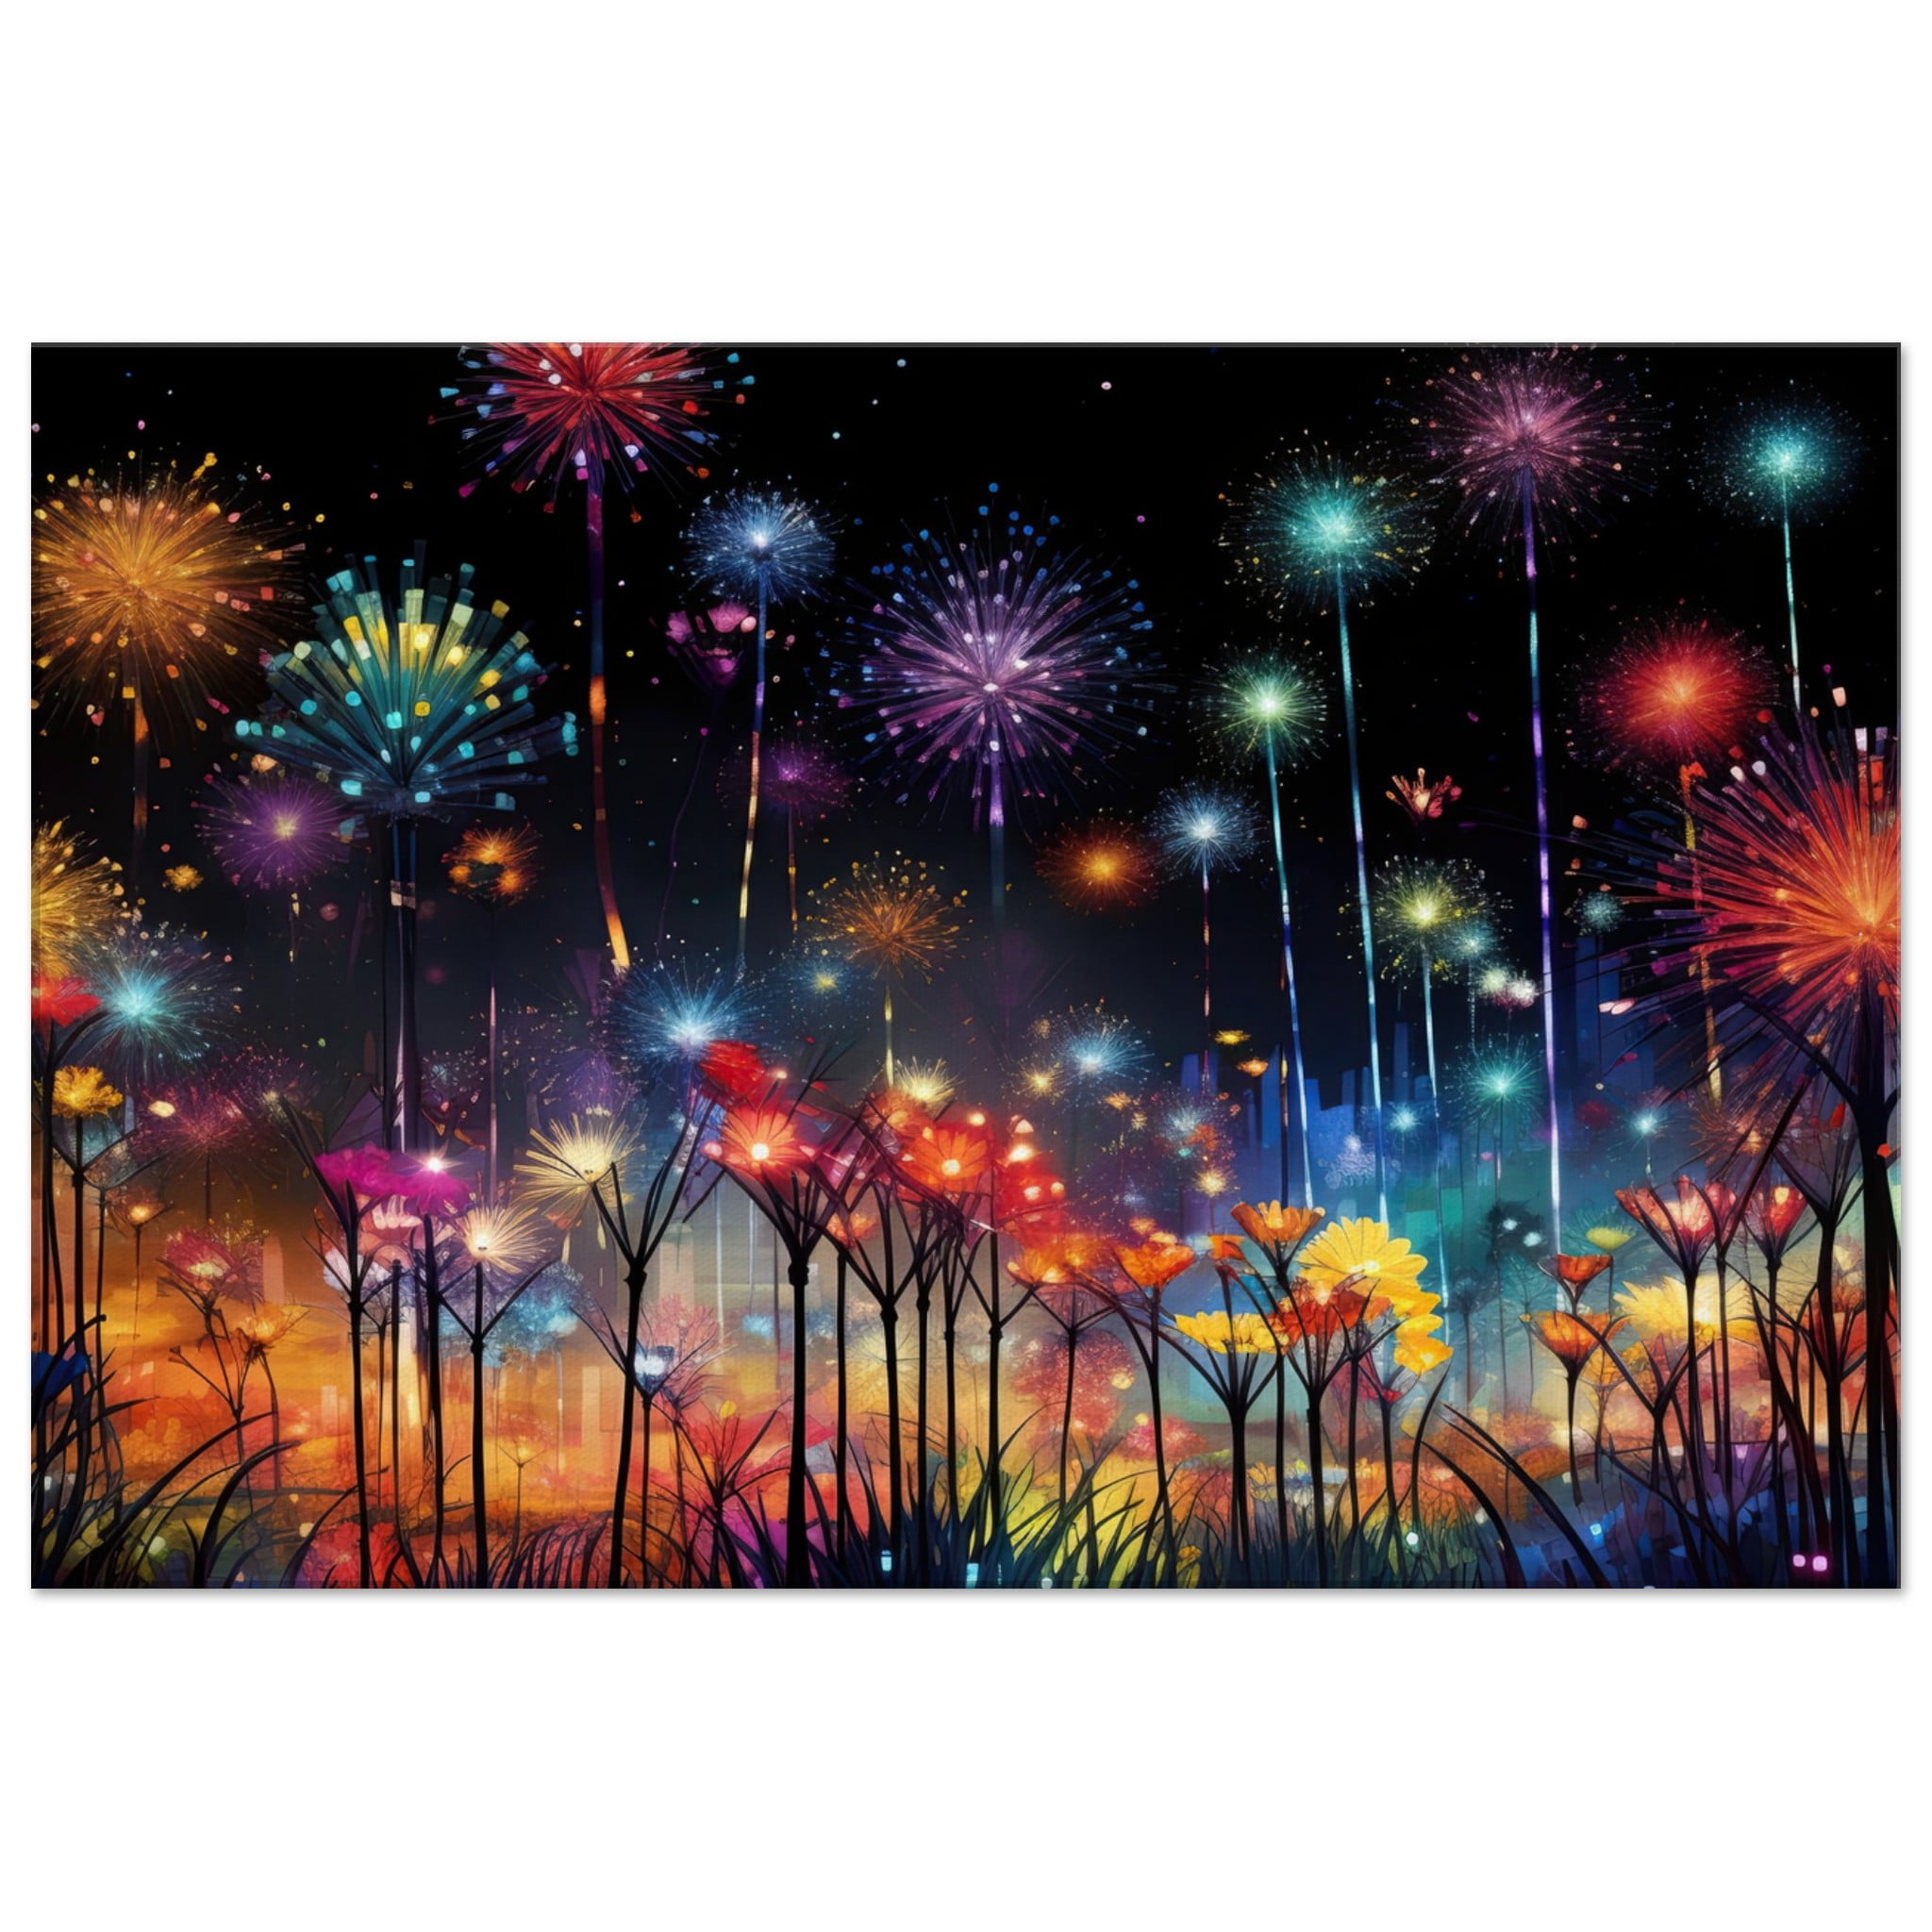 Fireworks and Flowers of Light and Color – Art Canvas Print – 60×90 cm / 24×36″, Thick